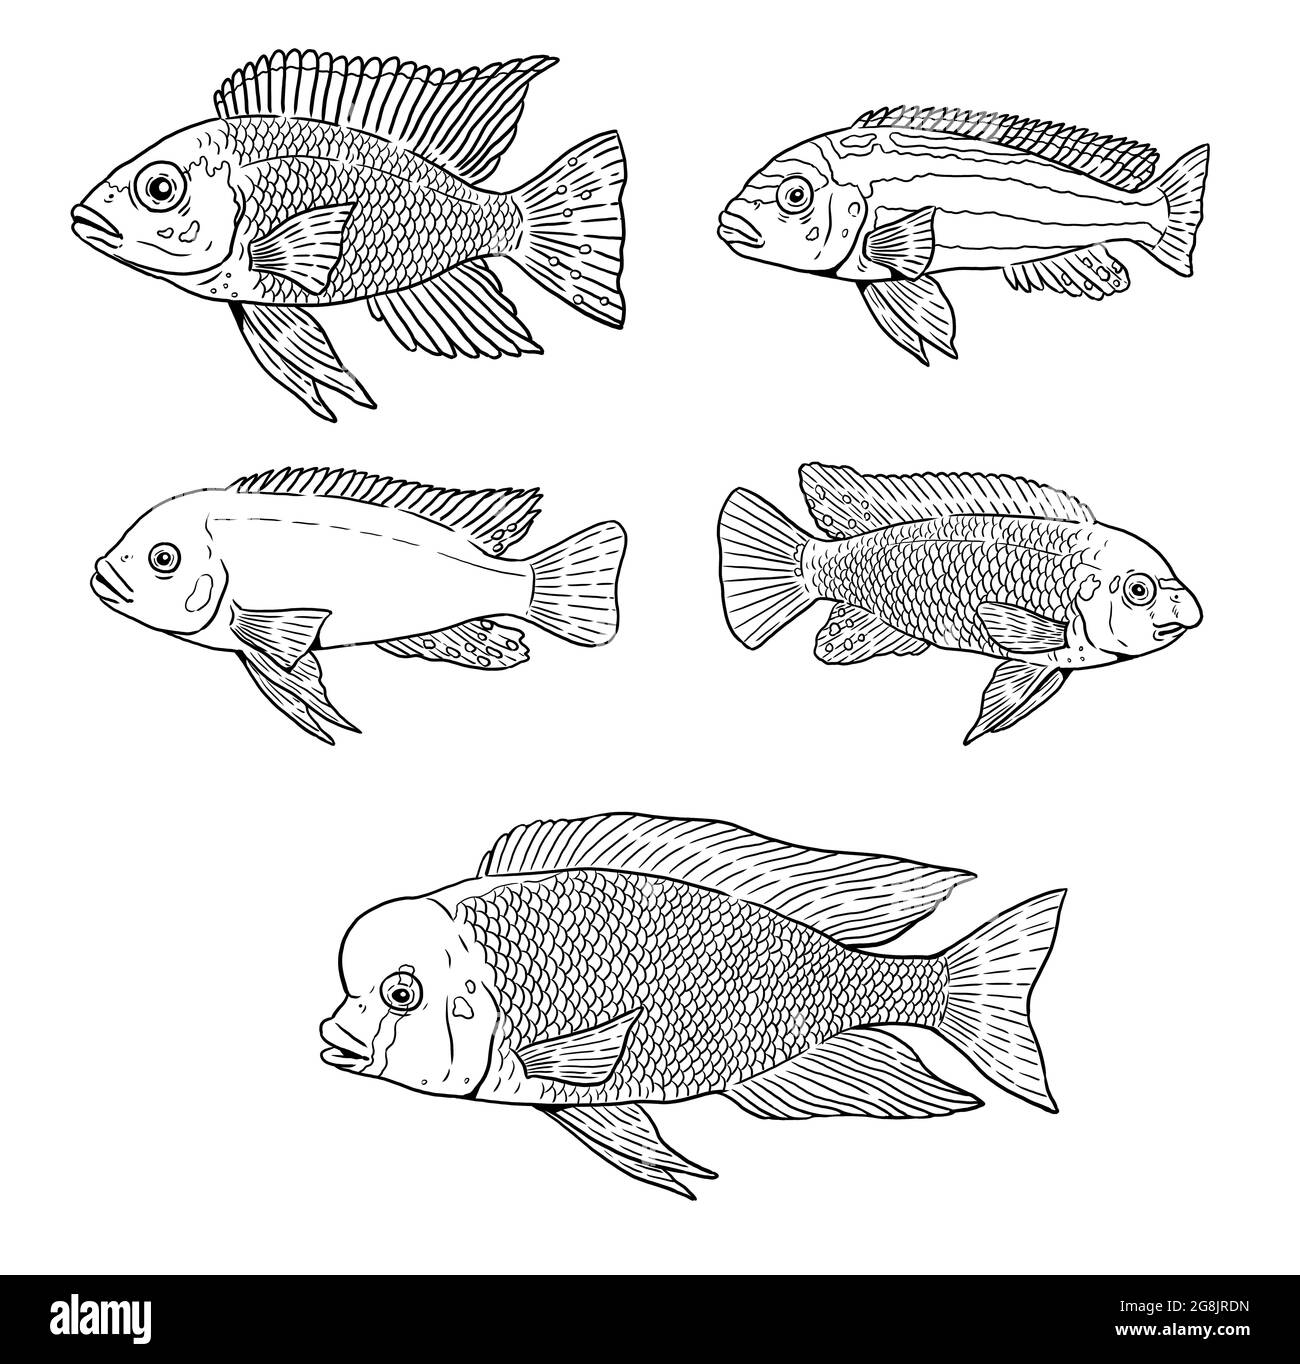 African cichlids from the Malawi lake for coloring. Colorful fish template. Coloring book for children and adults. Stock Photo